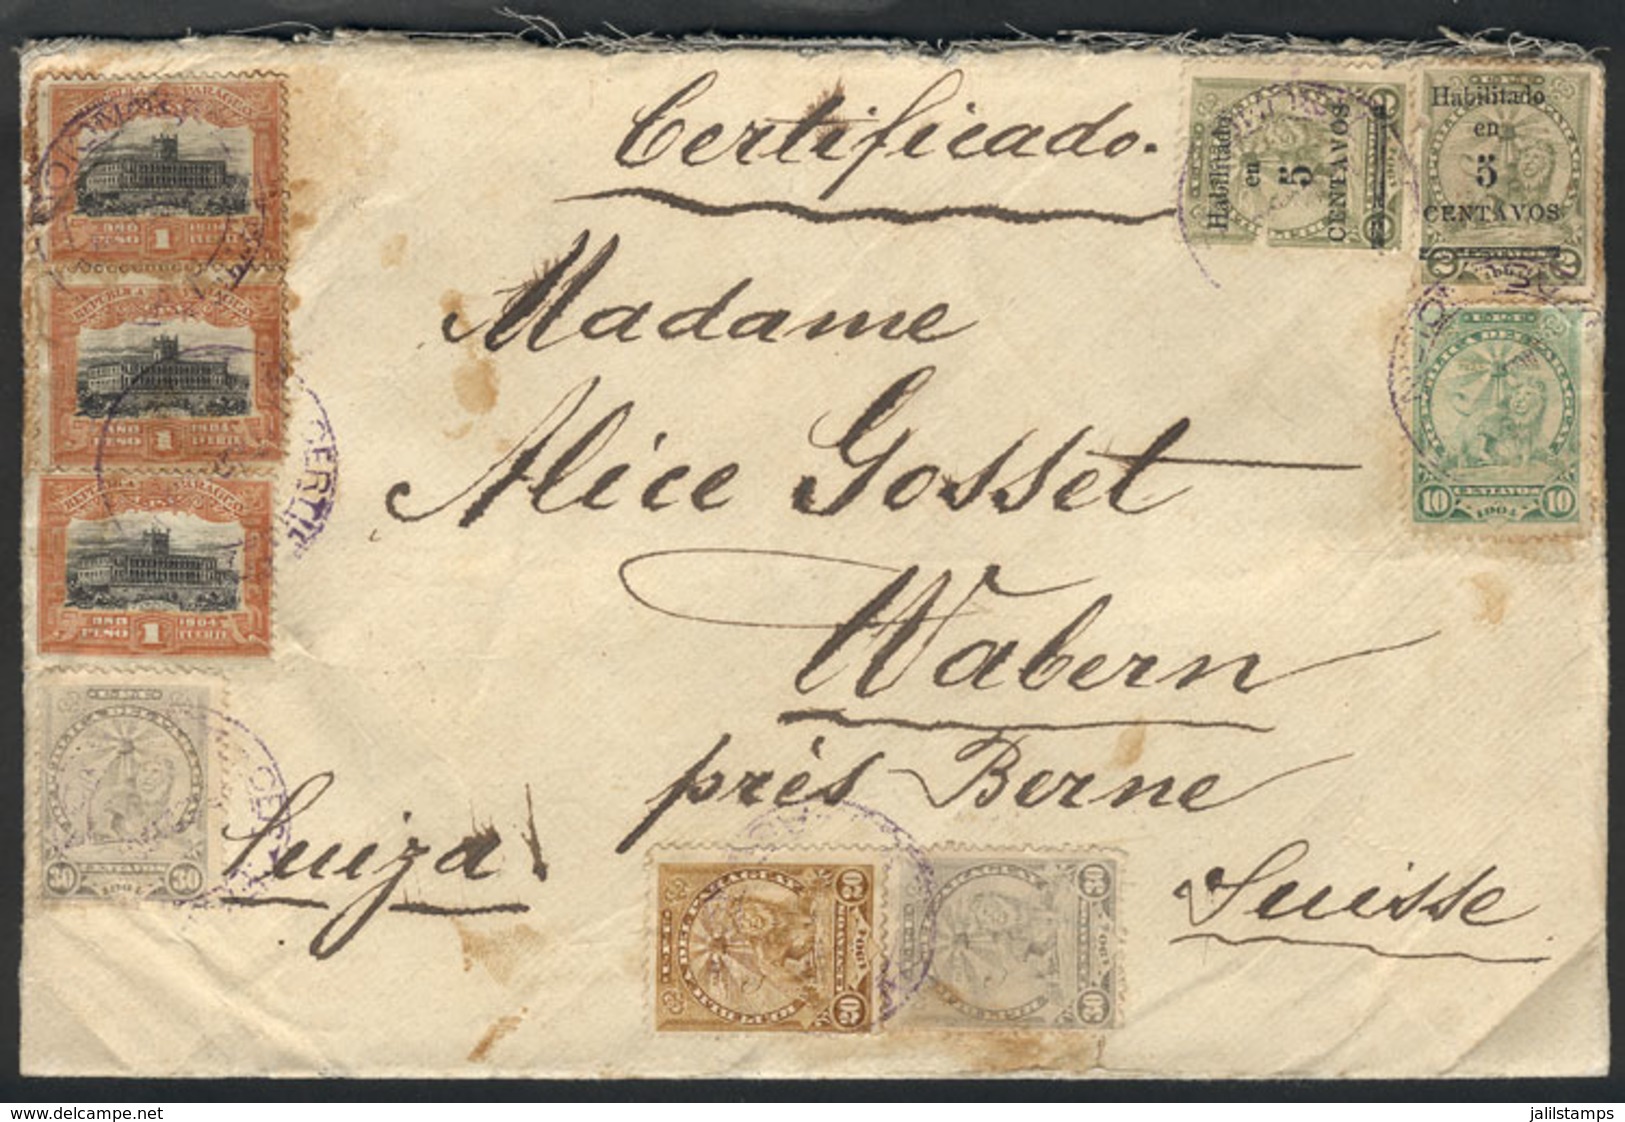 PARAGUAY: 17/AU/1907 Asunción - Wabern (Switzerland): Registered Cover With Advice Of Receipt, Franked With 4P. (interes - Paraguay